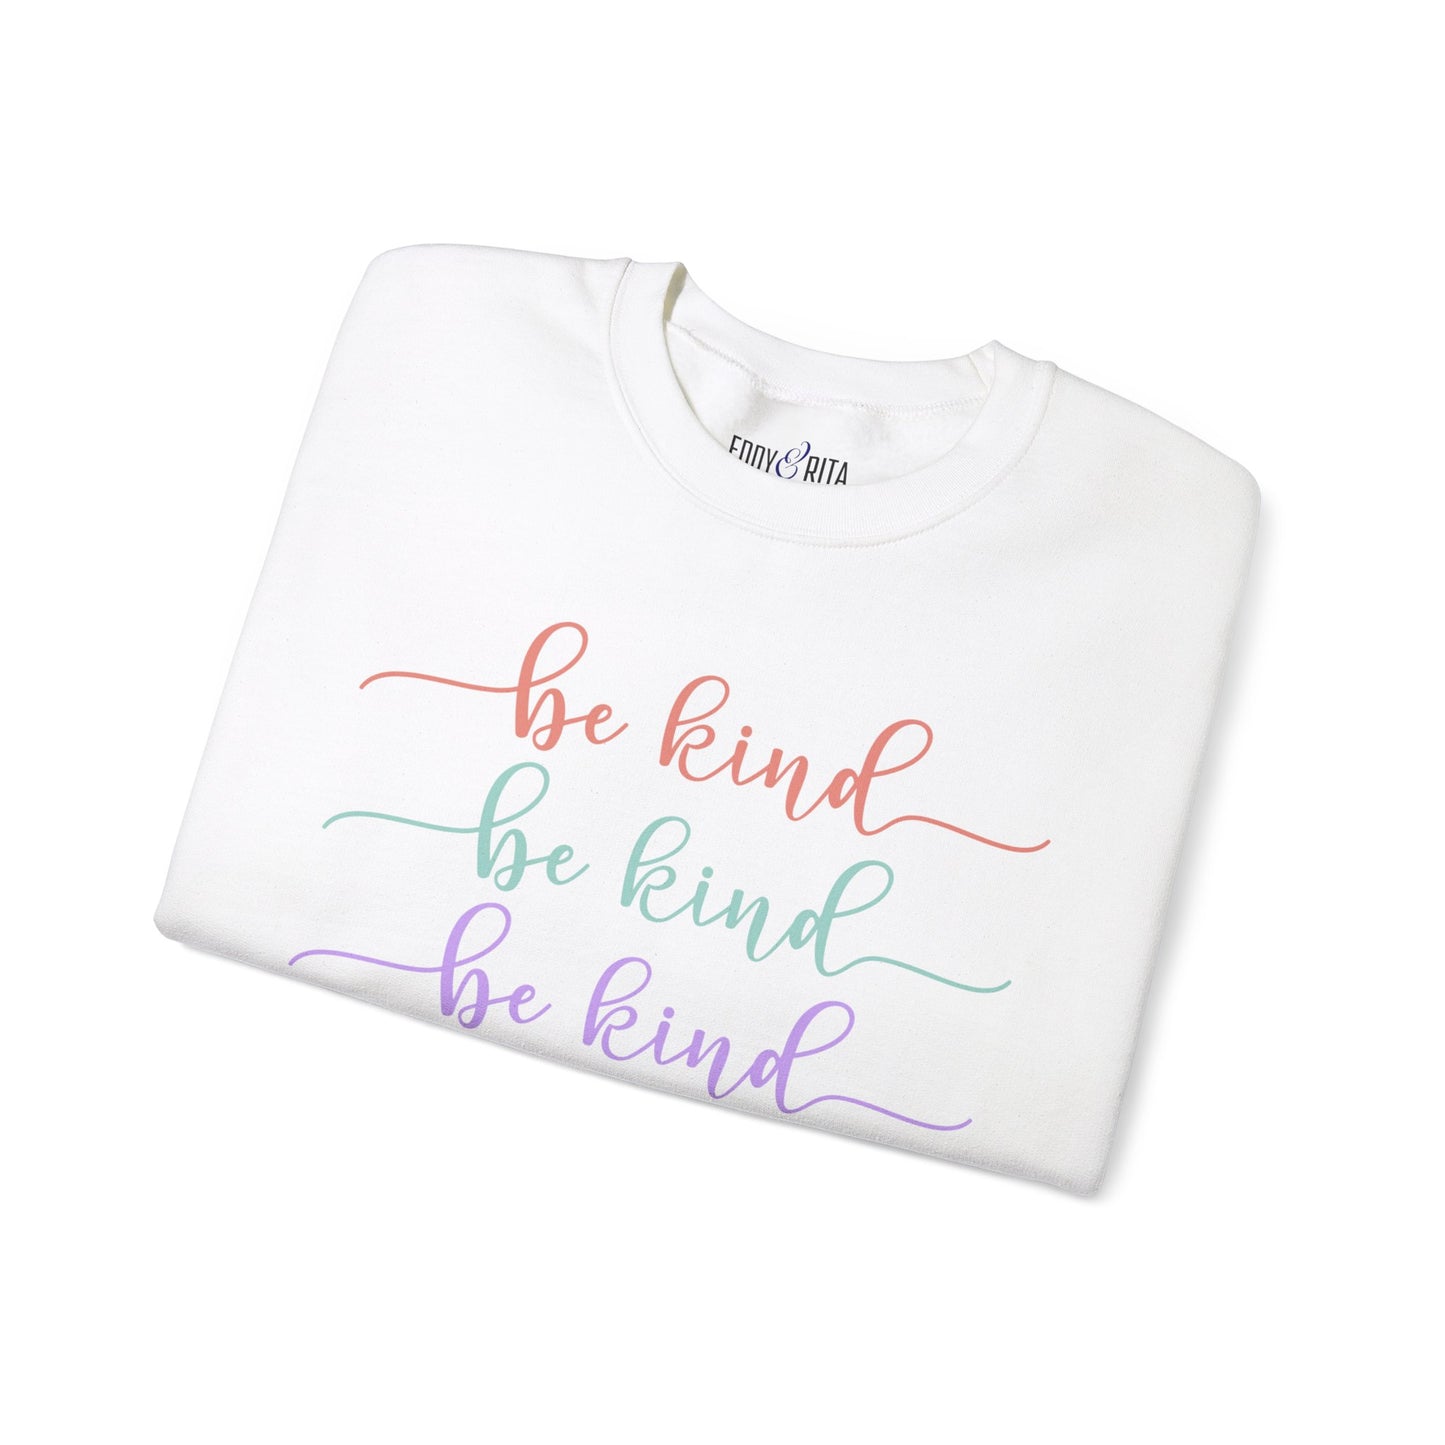 Be Kind: Women's Comfort Sweatshirt for Positive Vibes and Stylish Warmth